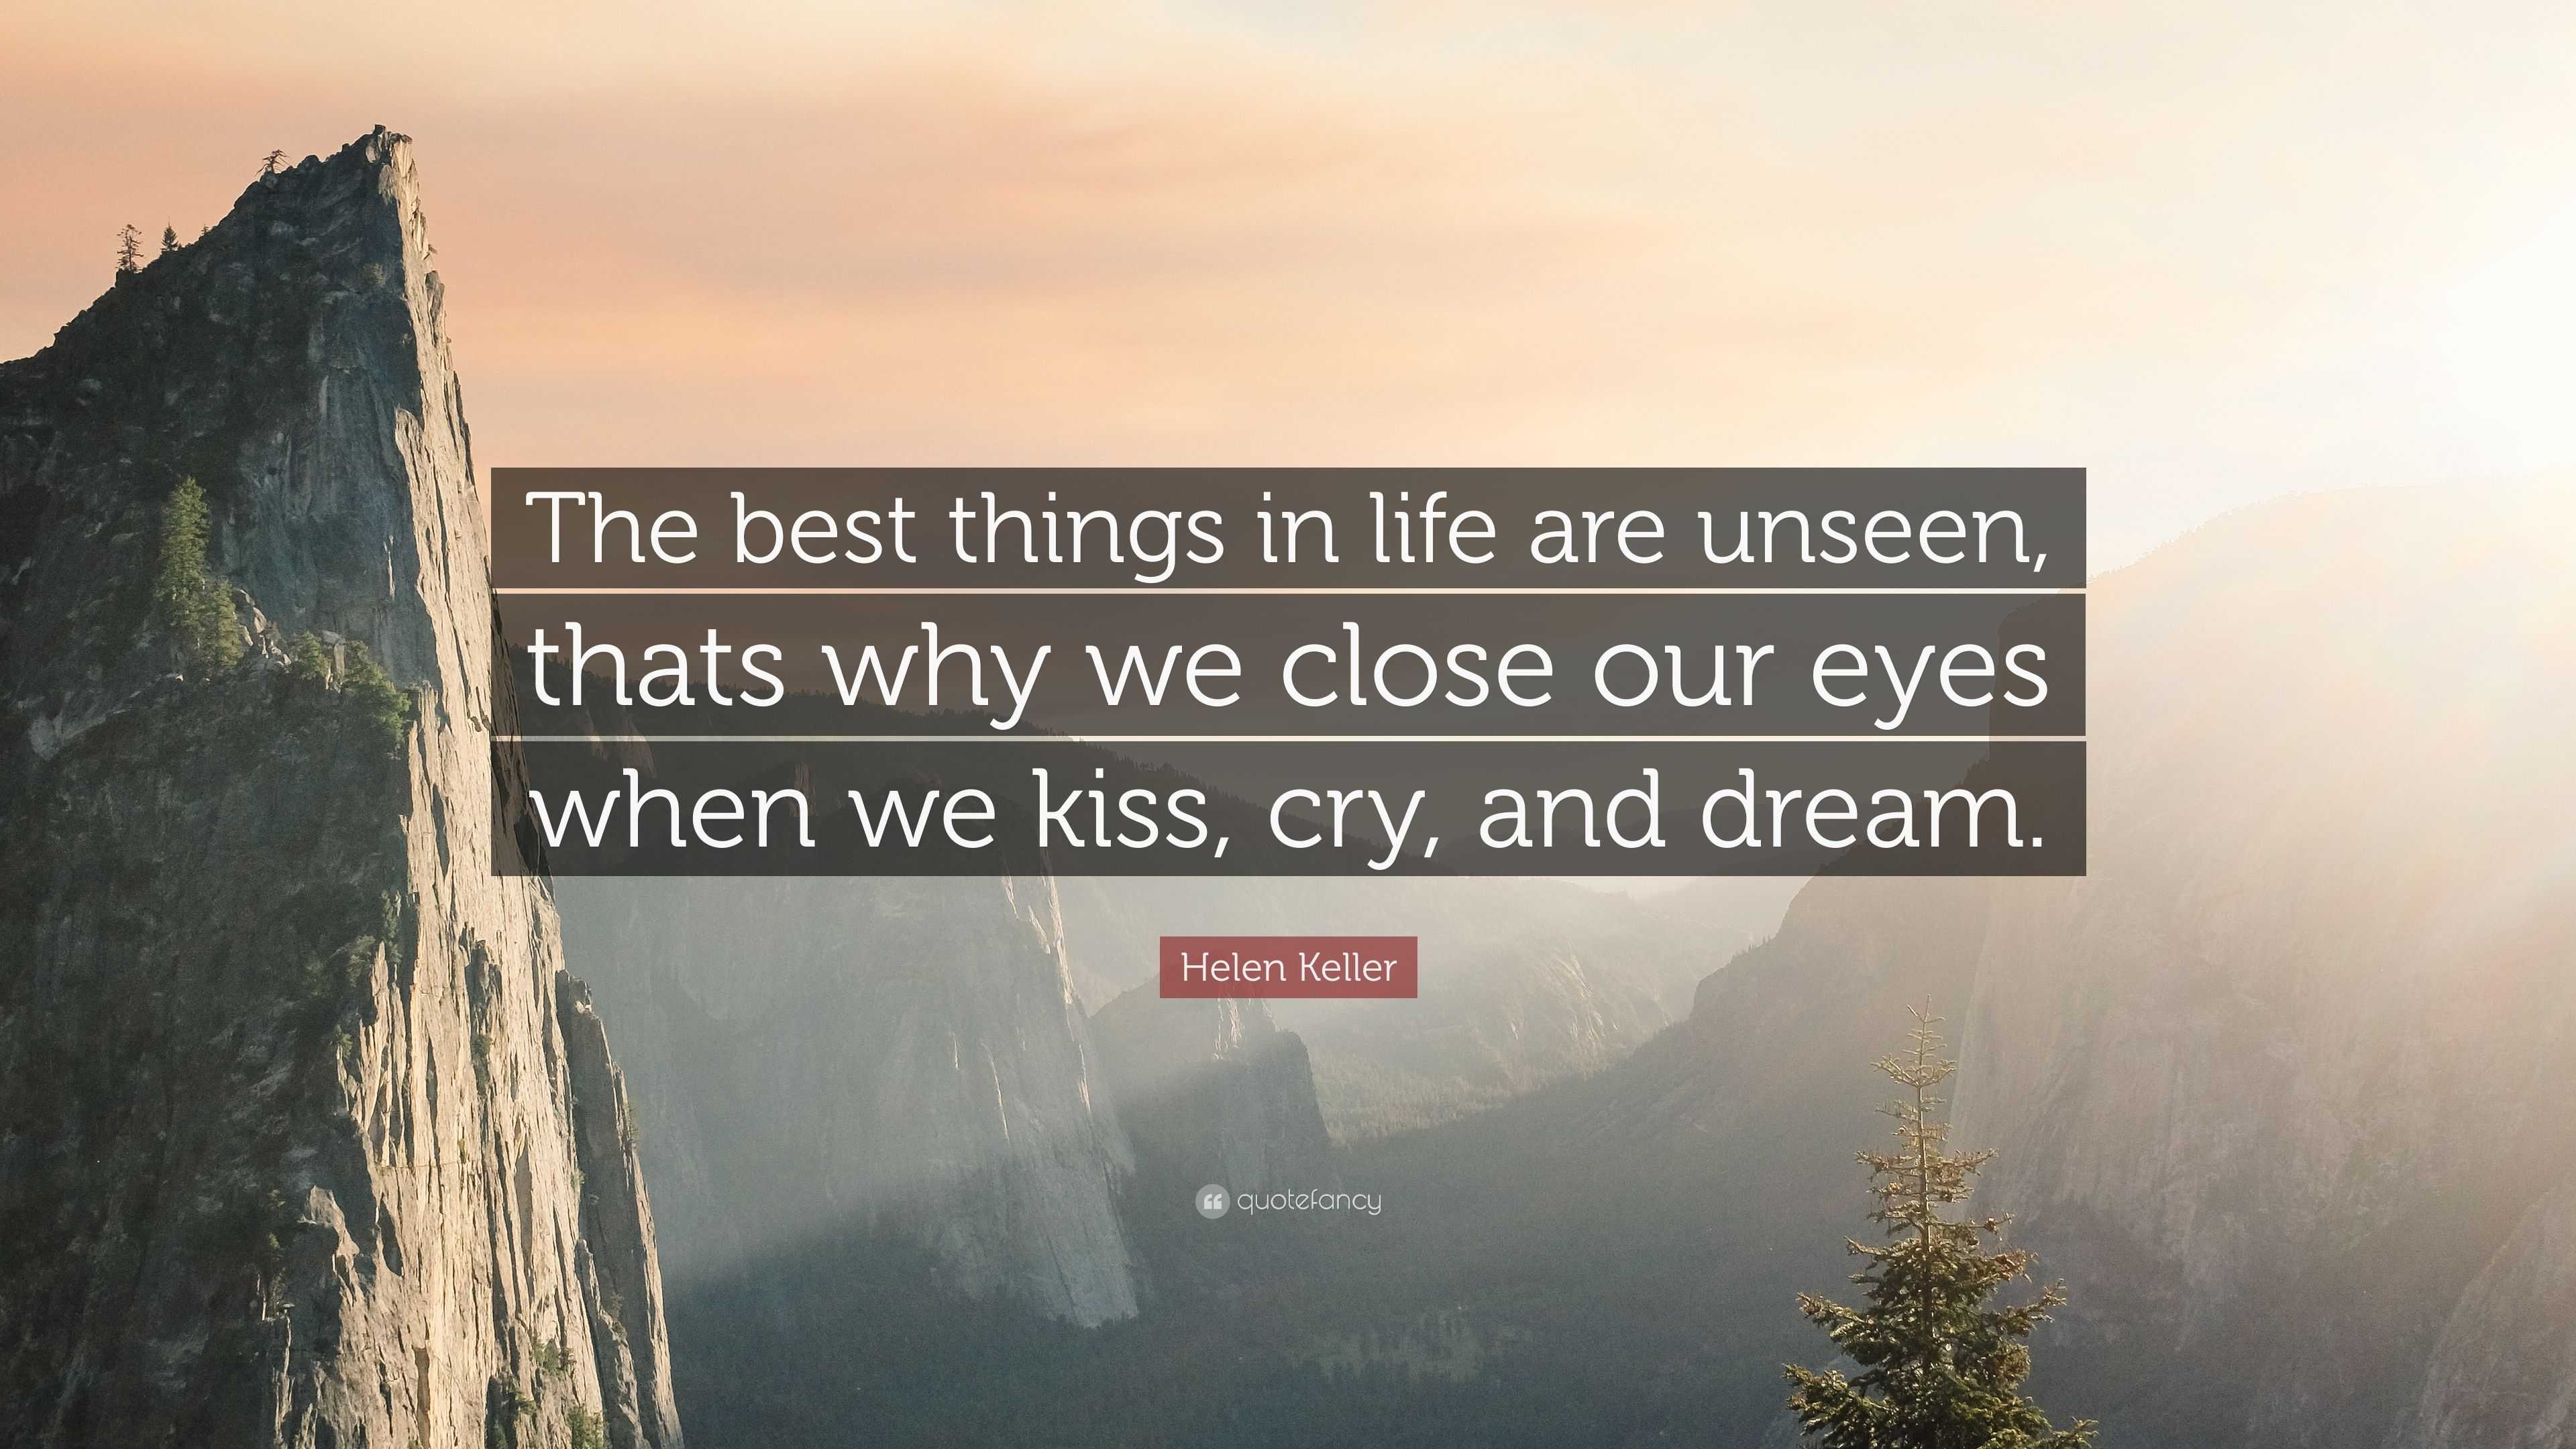 Helen Keller Quote “the Best Things In Life Are Unseen Thats Why We Close Our Eyes When We